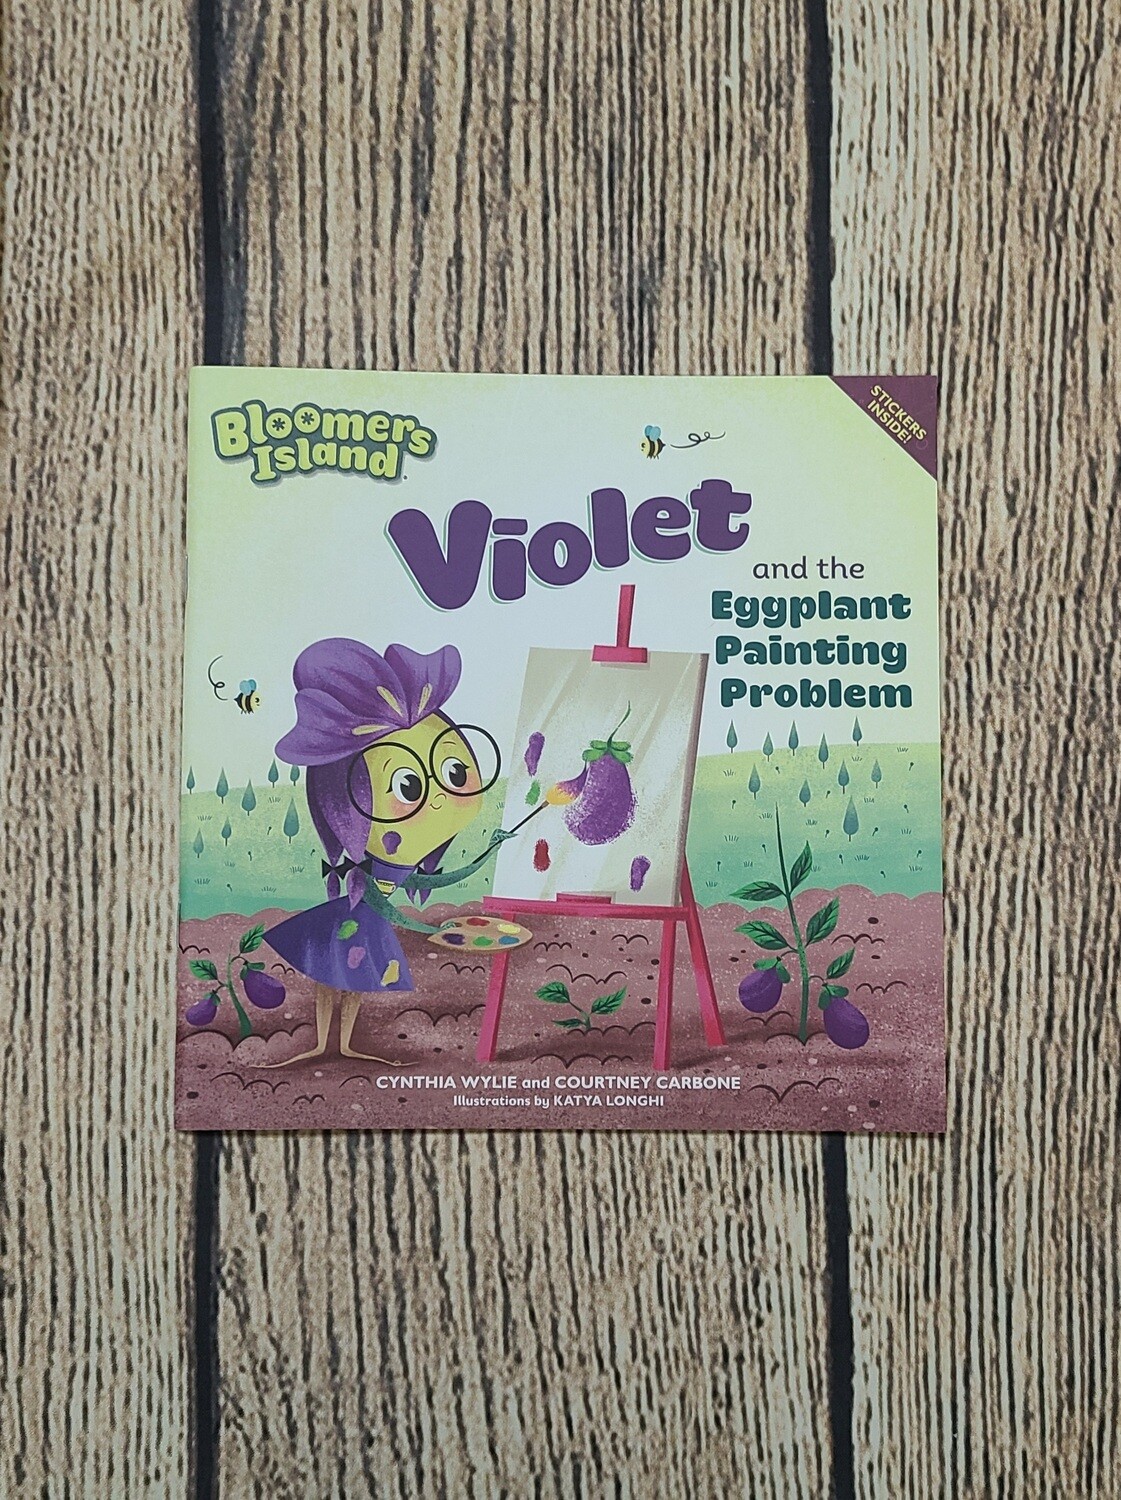 Bloomers Island: Violet and the Eggplant Painting Problem by Cynthia Wylie and Courtney Carbone with Illustrations by Katya Longhi - Paperback - Great Condition